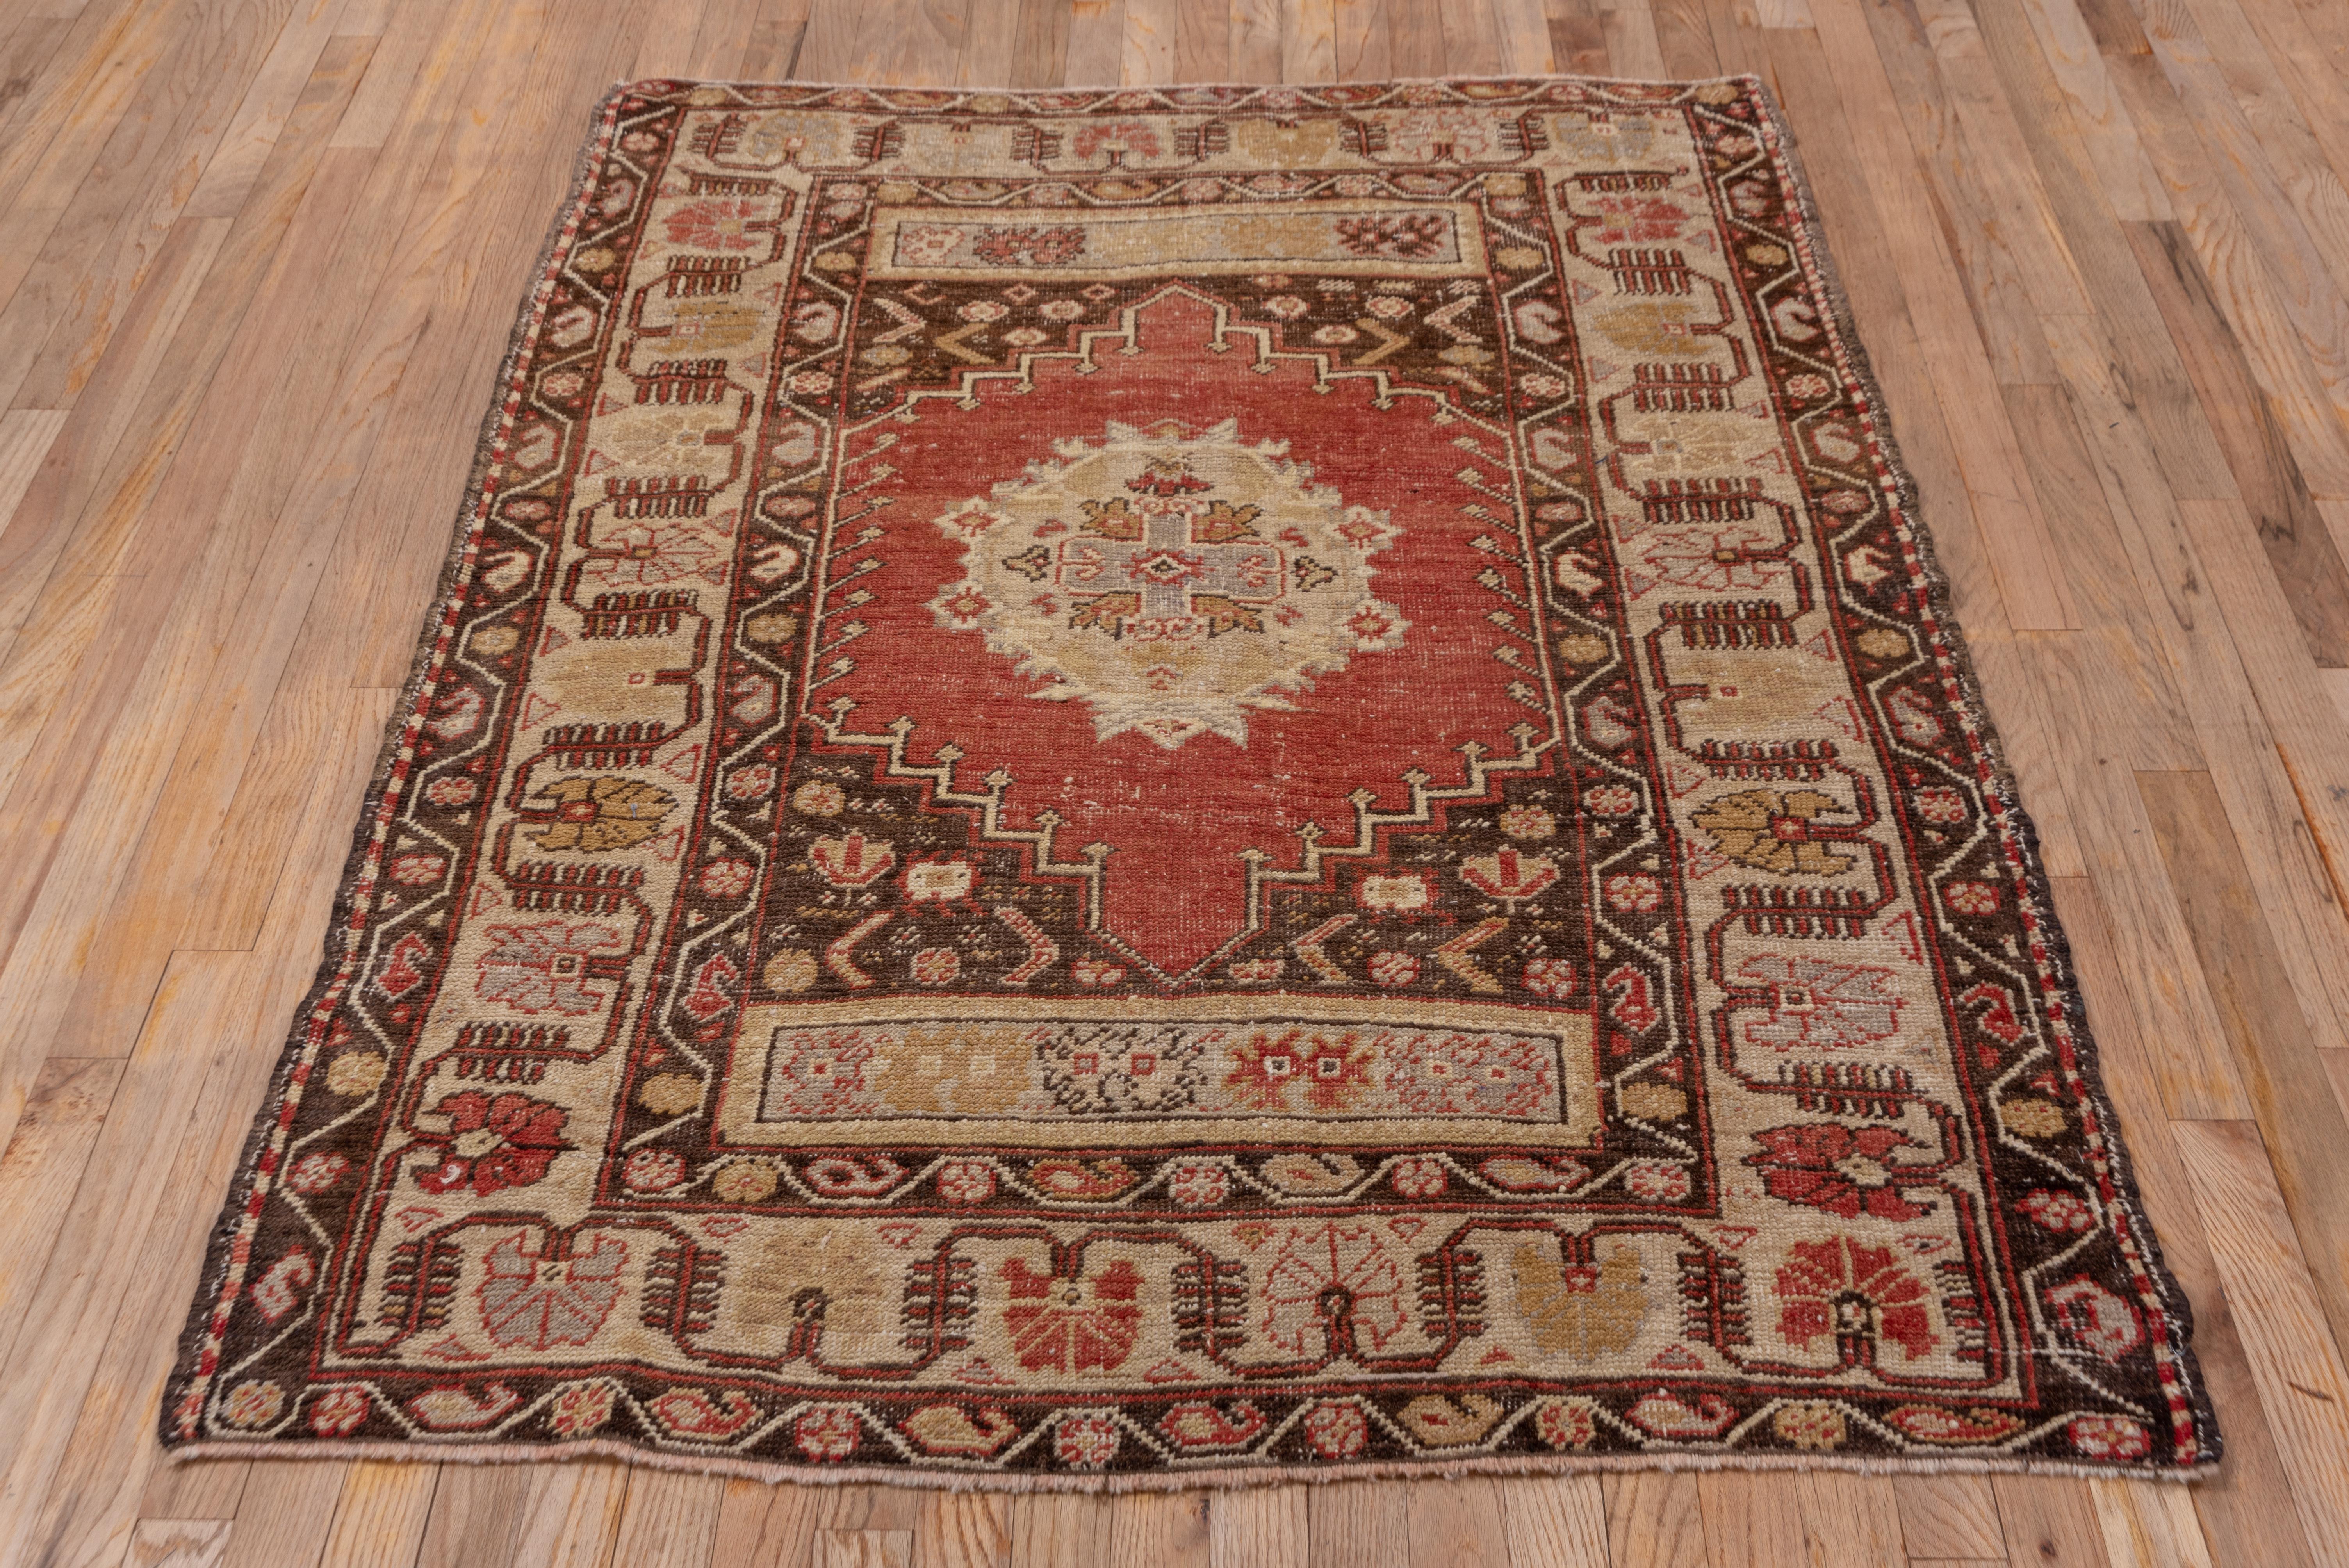 A cream border of reversing large carnations surrounds the red field with a hexagonal medallion and khaki end panels with simple ragged palmette motives. Botehs and rosettes decorate the brown guard stripes of this fair condition Anatolian scatter.